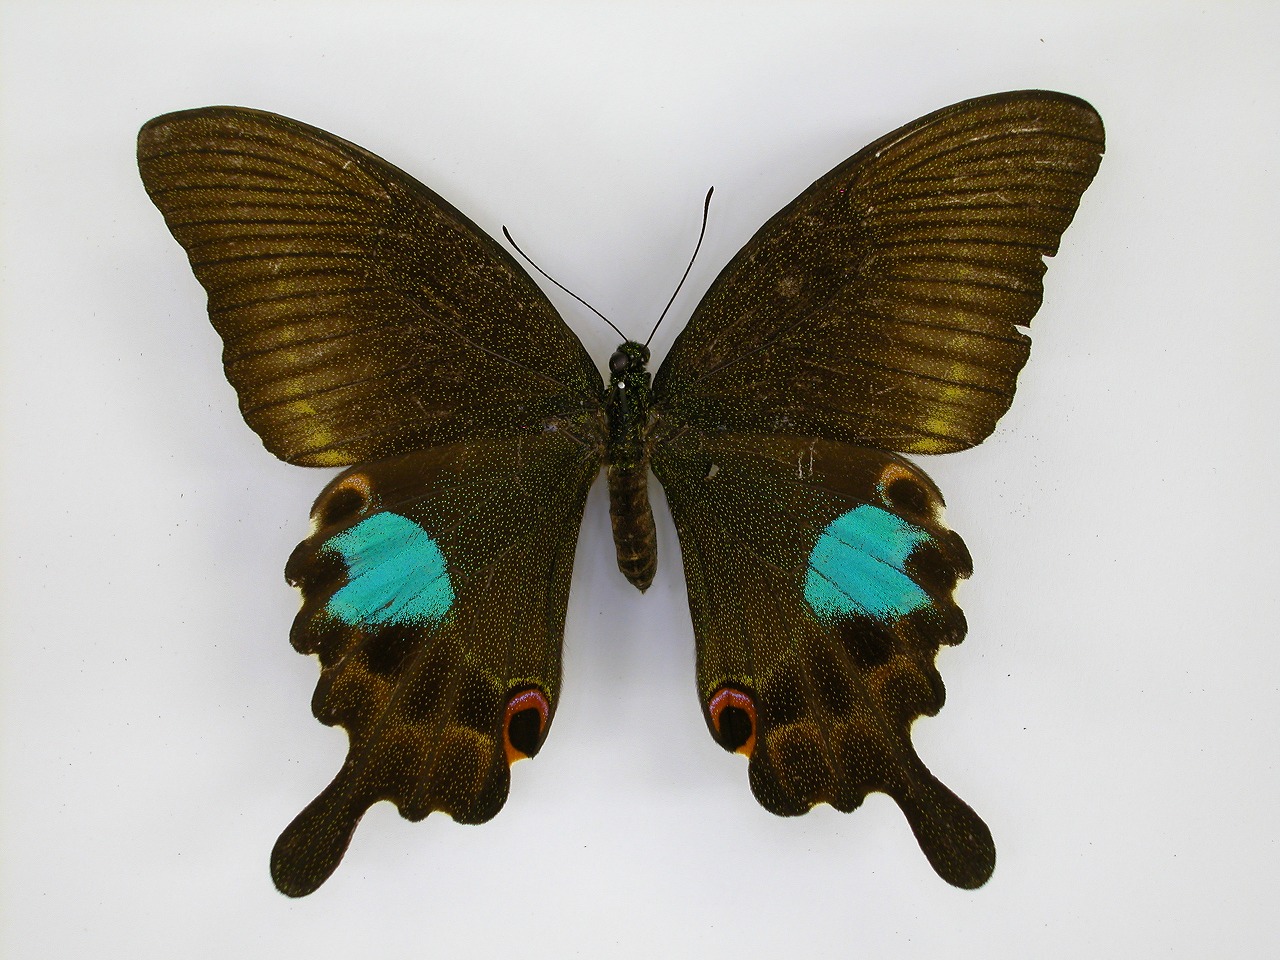 https://www.hitohaku.jp/material/l-material/butterfly-wing/1-papilionidae/B1-269827_A.jpg